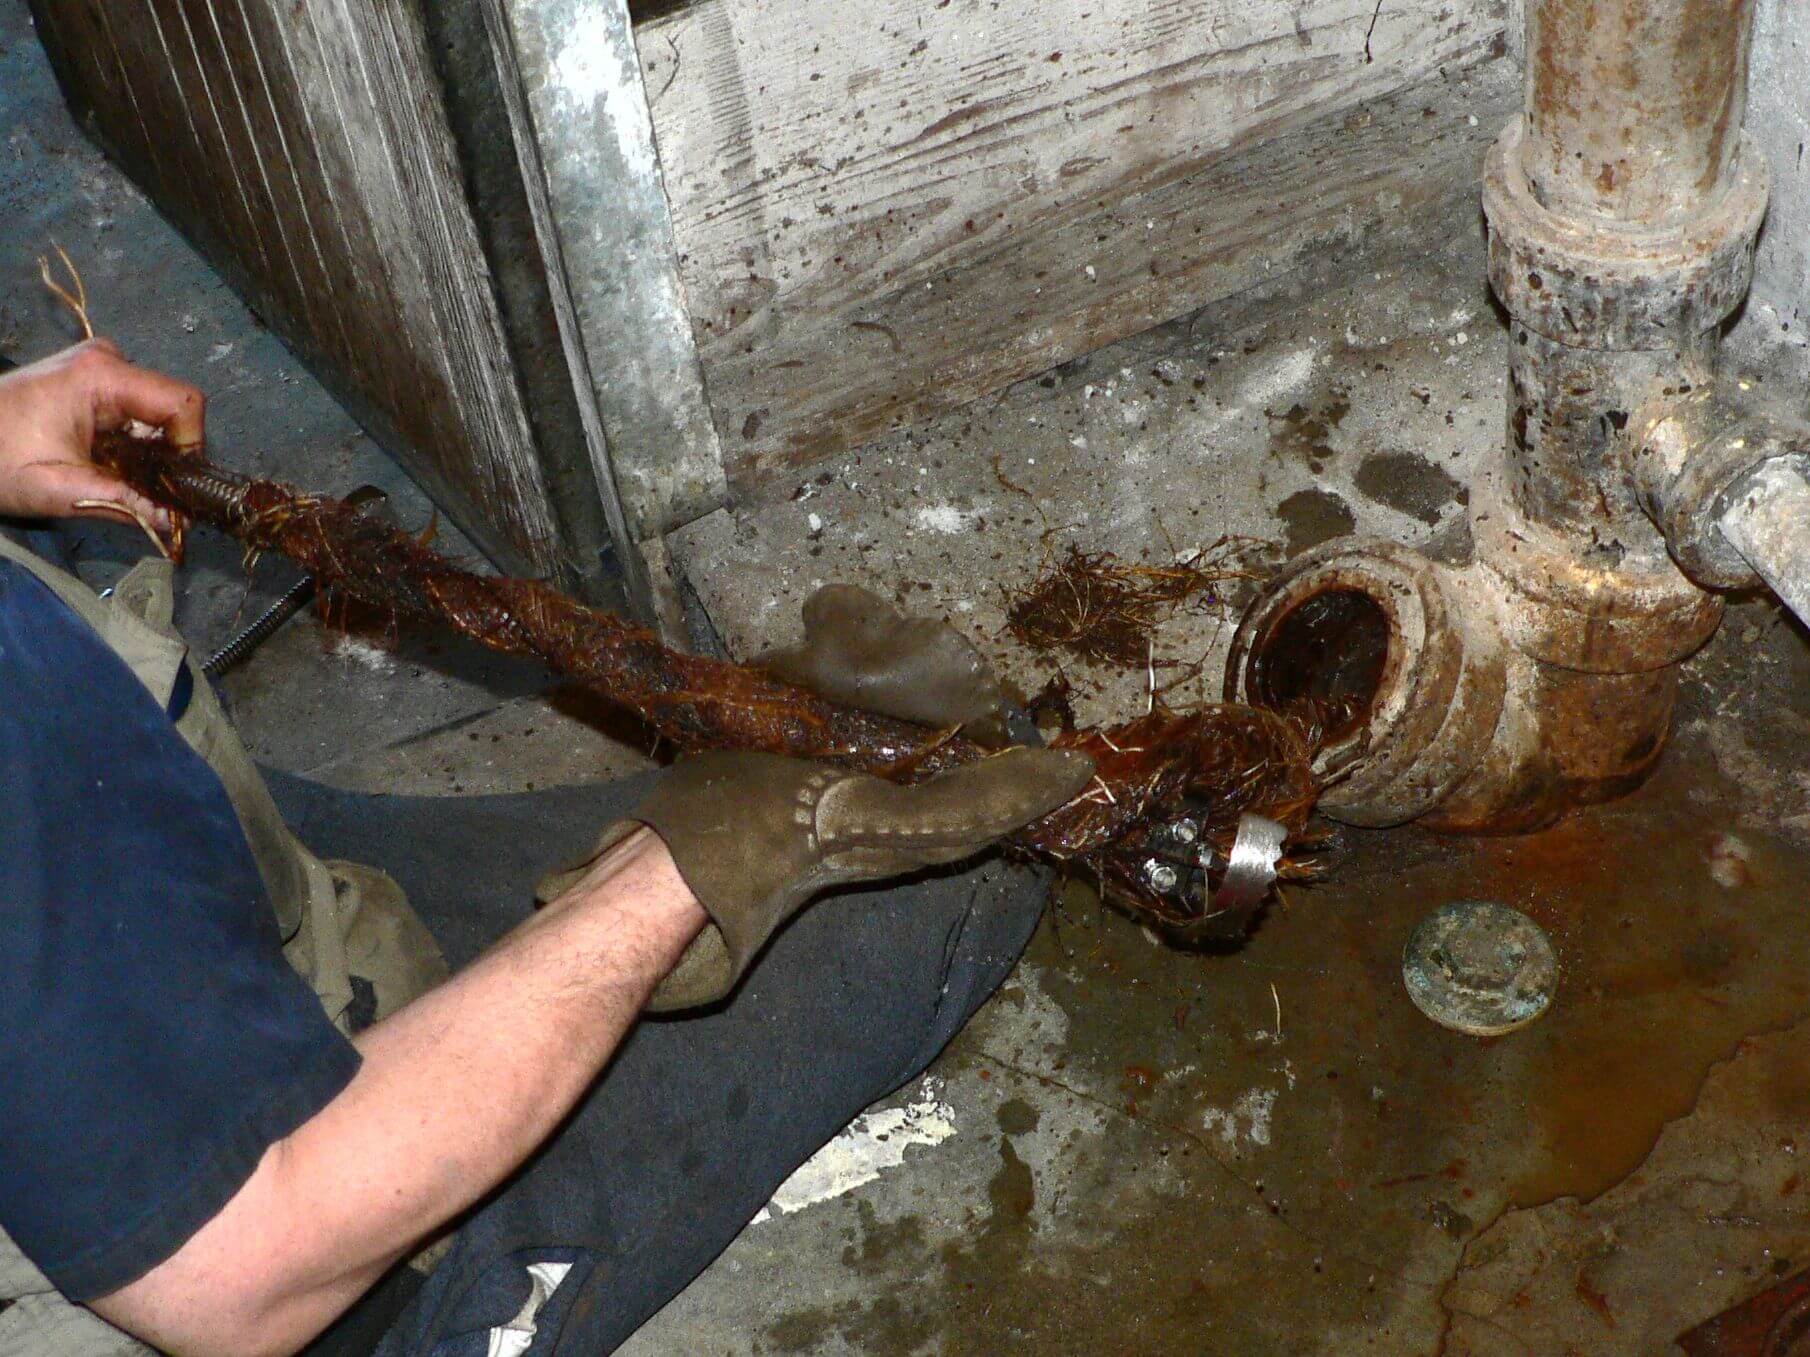 Contact Us-Laredo TX Septic Tank Pumping, Installation, & Repairs-We offer Septic Service & Repairs, Septic Tank Installations, Septic Tank Cleaning, Commercial, Septic System, Drain Cleaning, Line Snaking, Portable Toilet, Grease Trap Pumping & Cleaning, Septic Tank Pumping, Sewage Pump, Sewer Line Repair, Septic Tank Replacement, Septic Maintenance, Sewer Line Replacement, Porta Potty Rentals, and more.